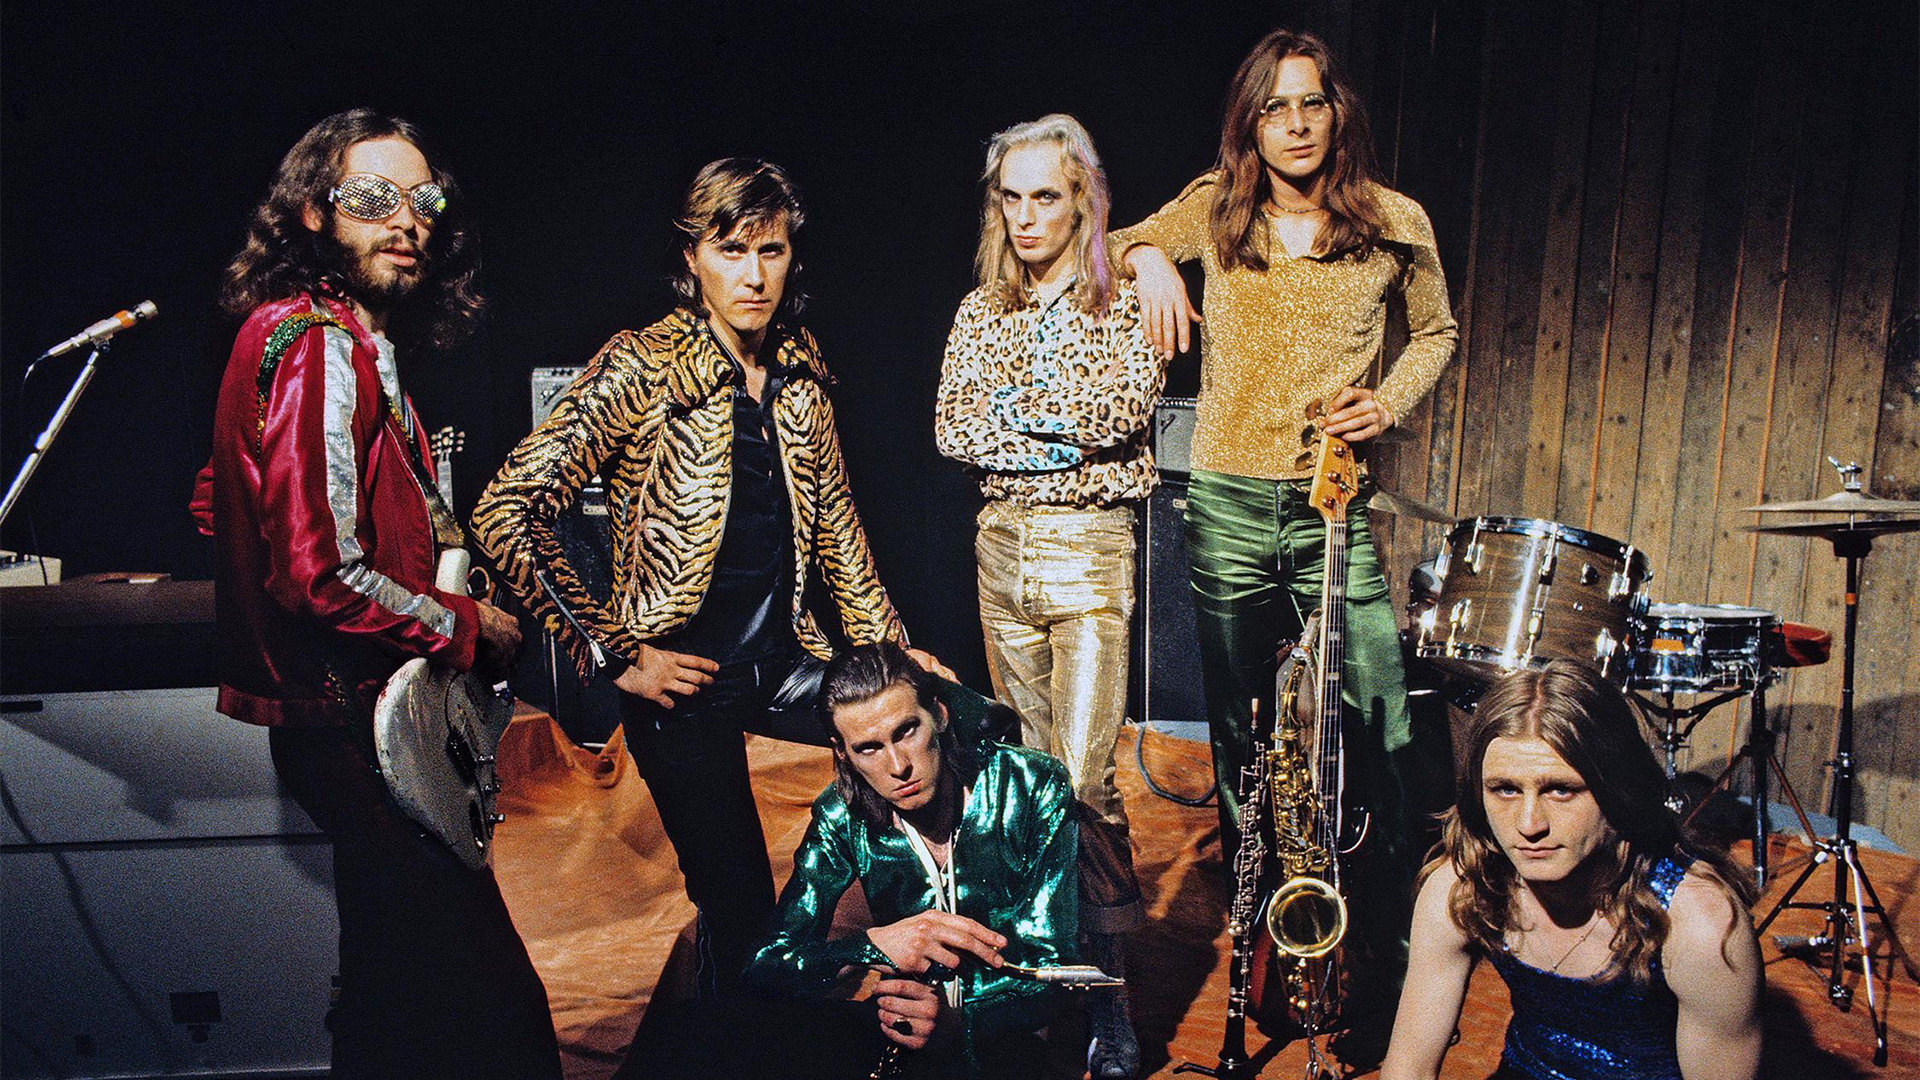 The members of Roxy Music face the camera